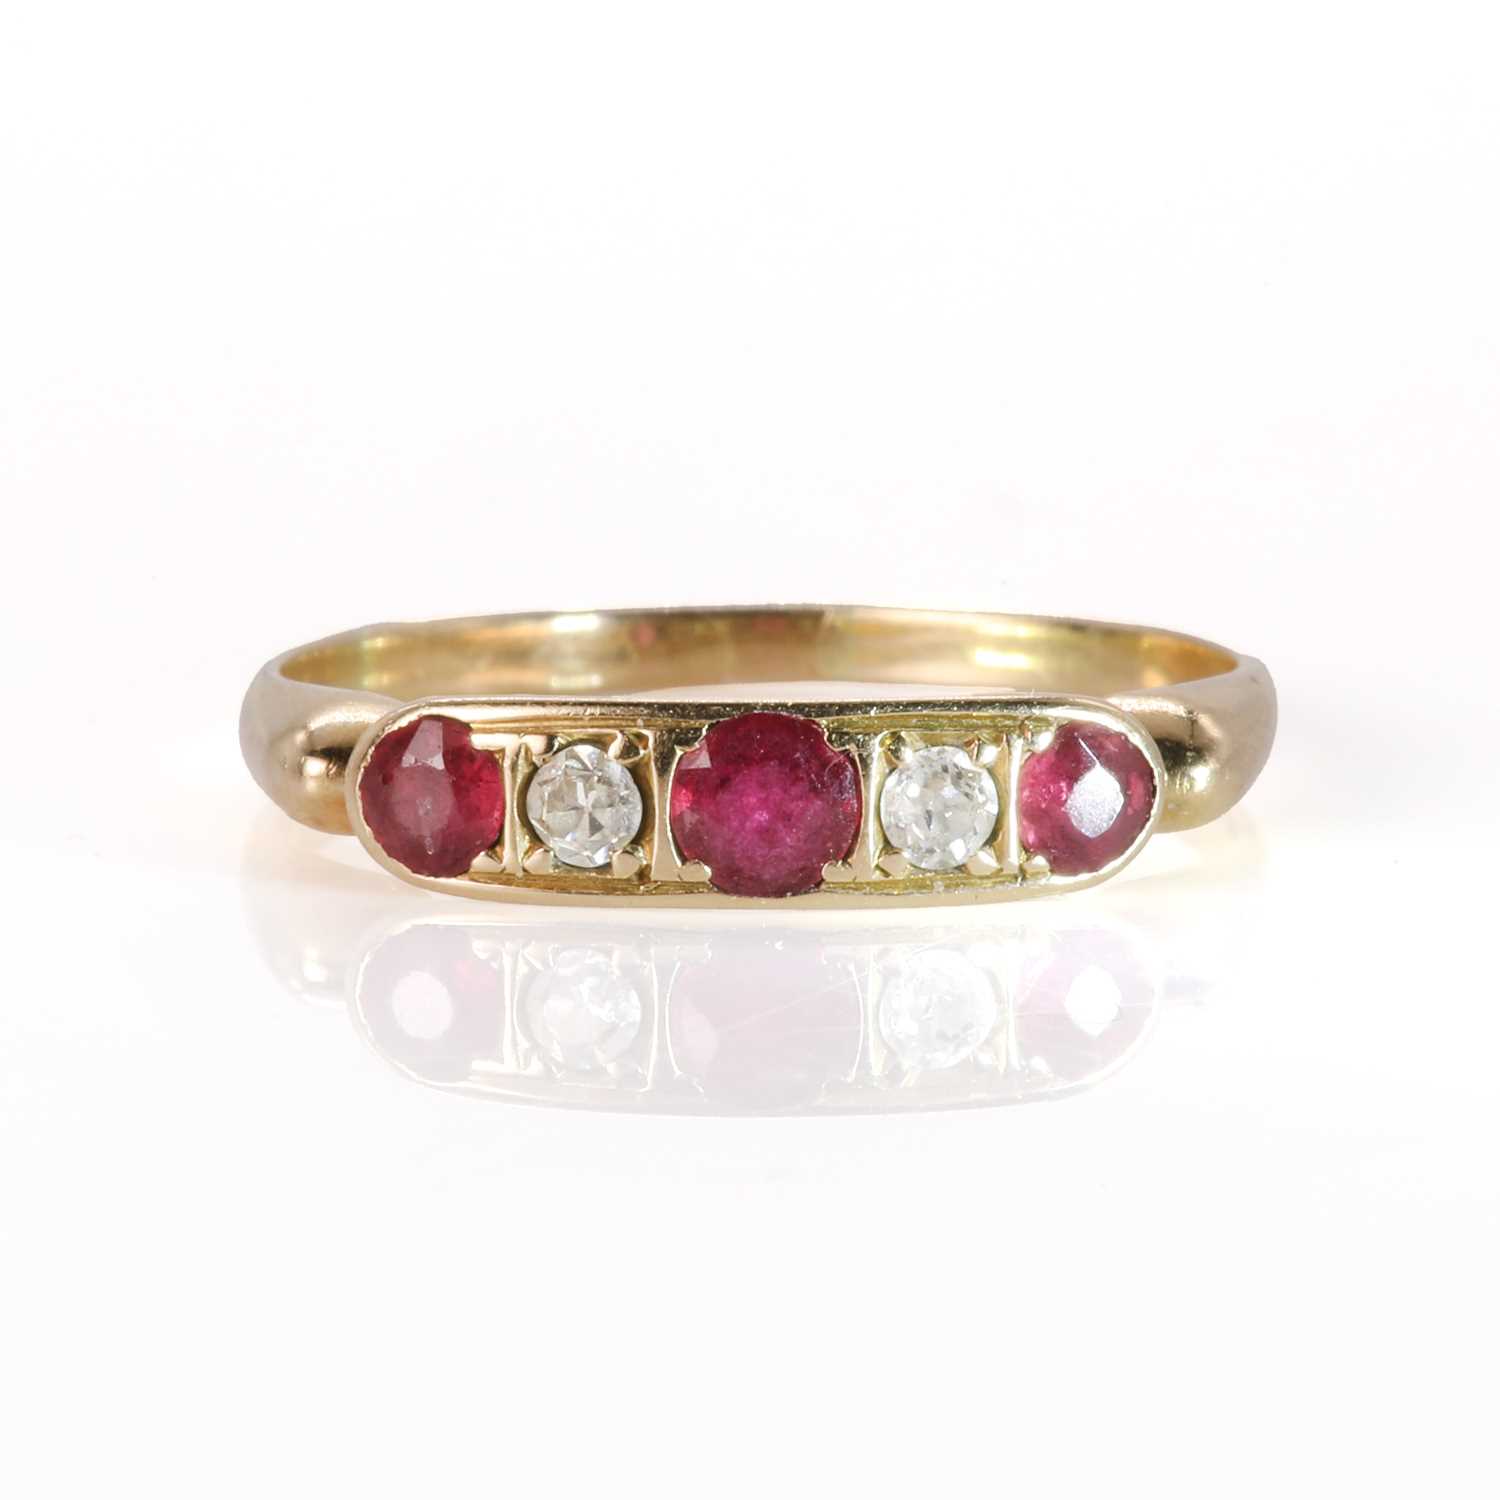 Lot 89 - An 18ct gold ruby and diamond ring